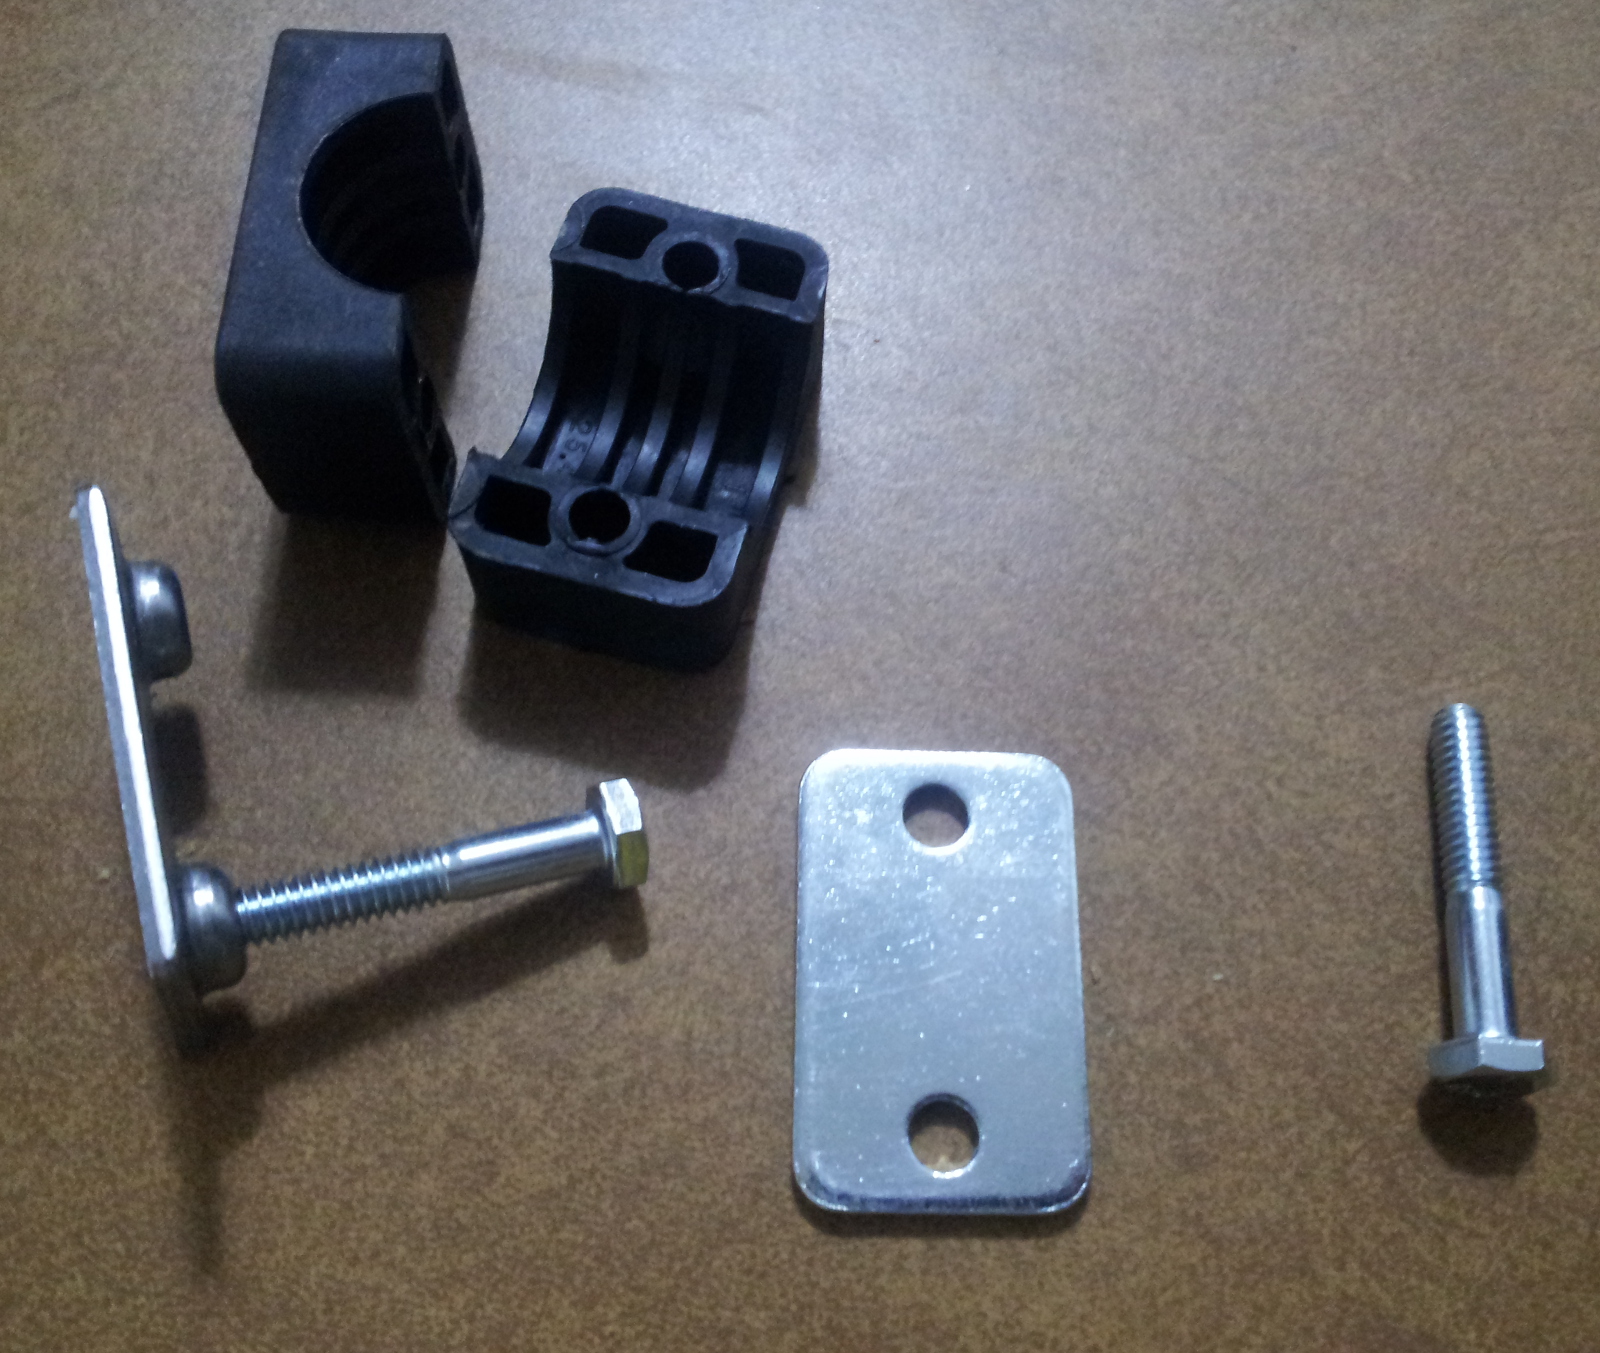 hose clamps disassembled